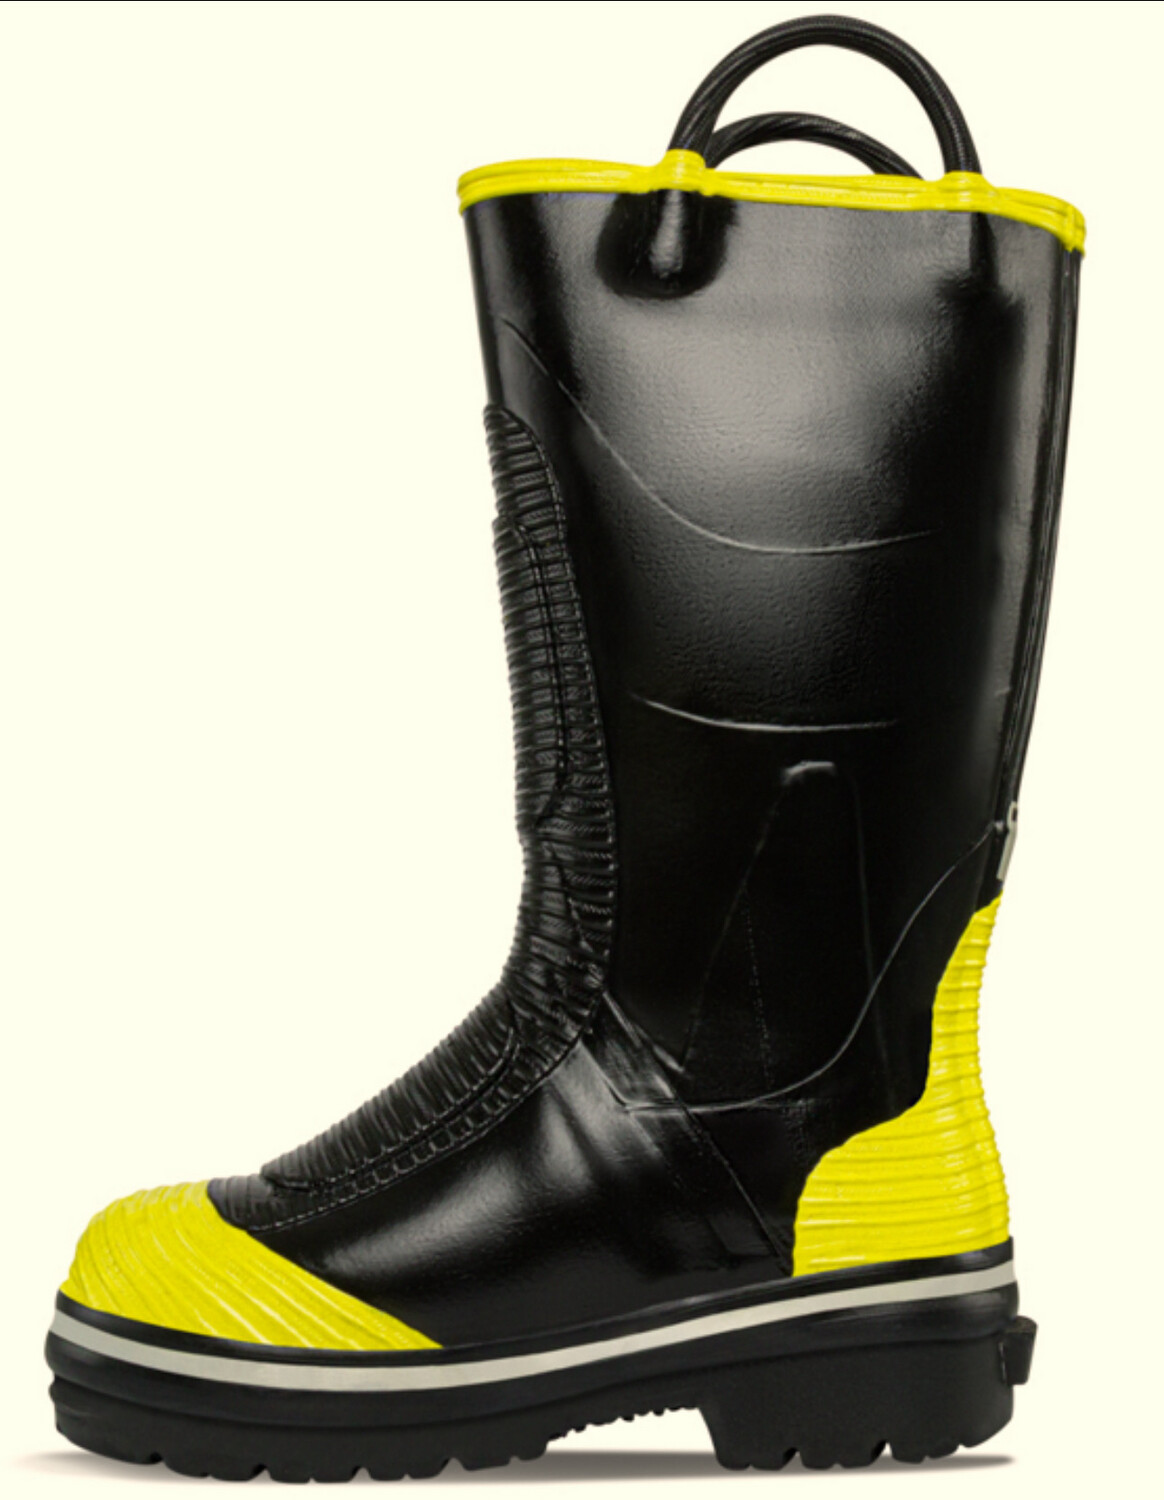 Saber II Rubber Firefighter Structural Boot